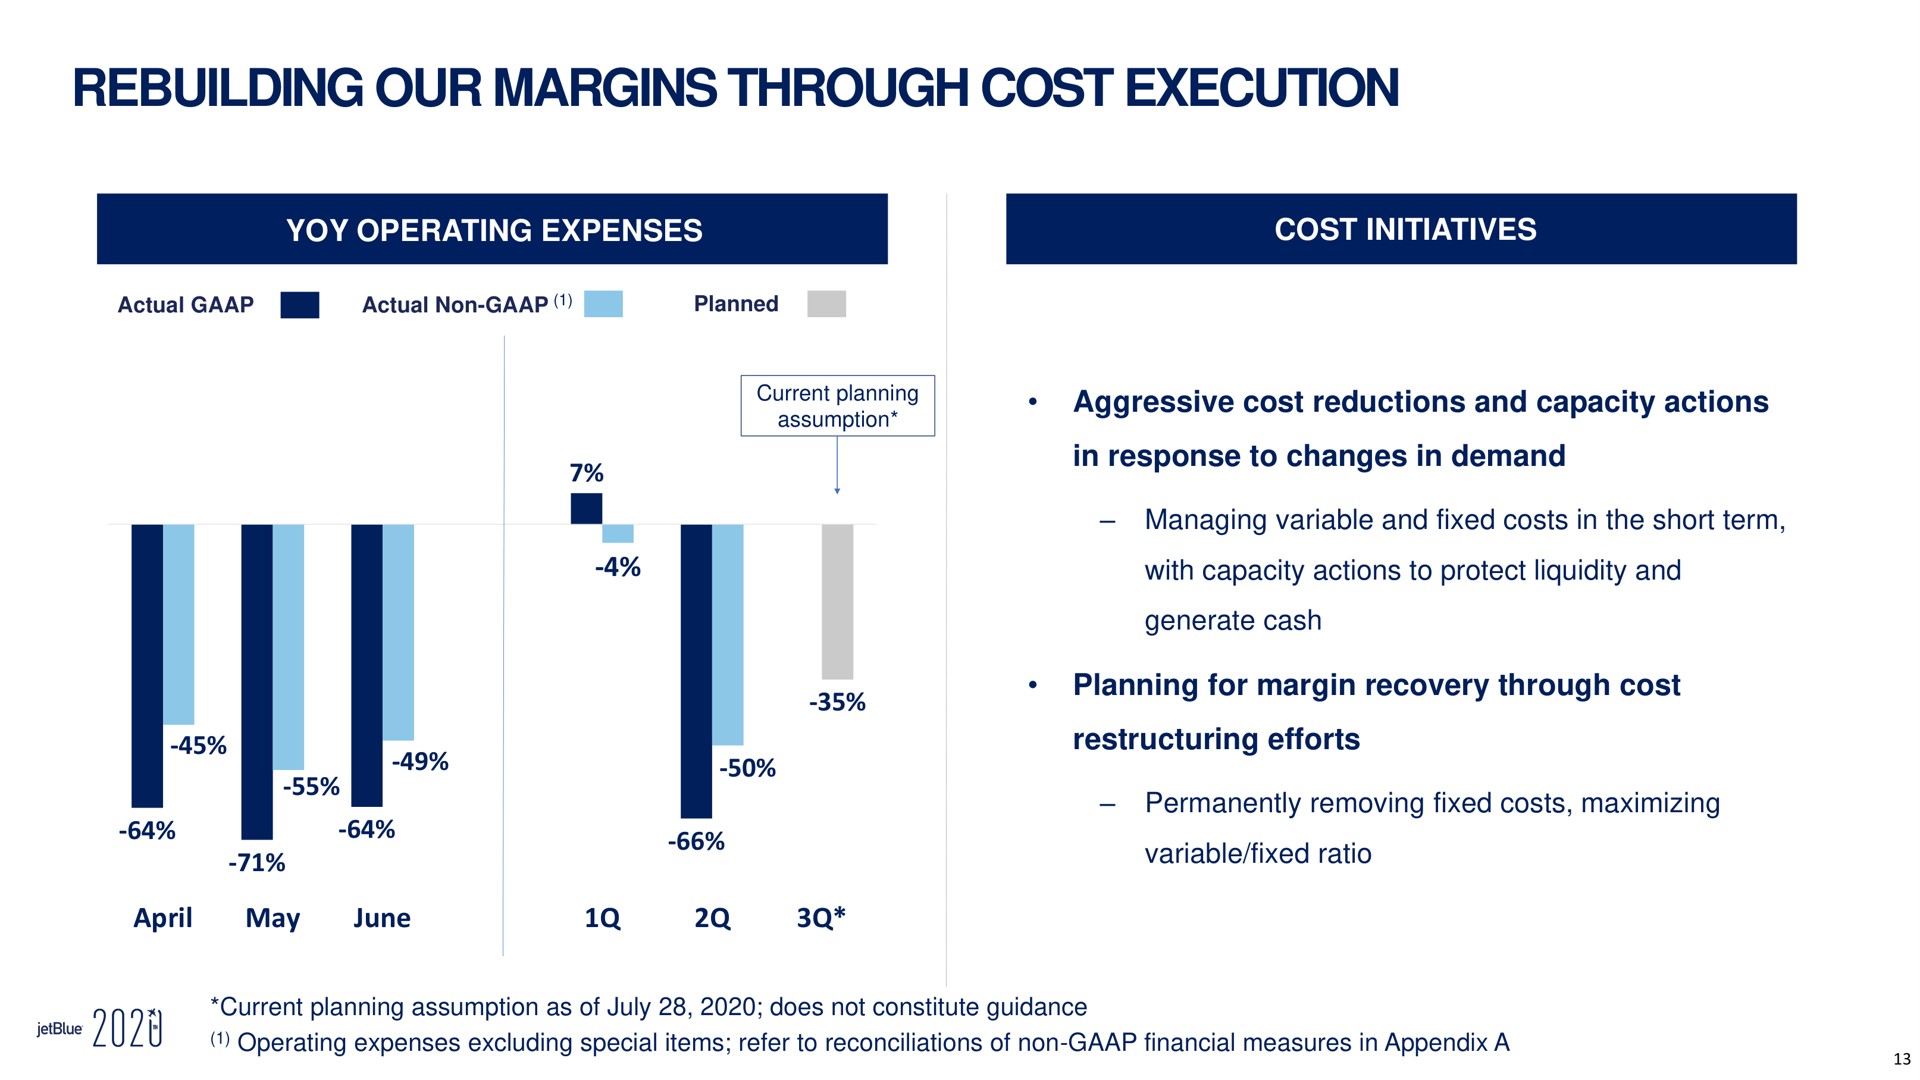 rebuilding our margins through cost execution yoy operating expenses cost initiatives aggressive cost reductions and capacity actions in response to changes in demand planning for margin recovery through cost efforts may june variable fixed ratio | jetBlue